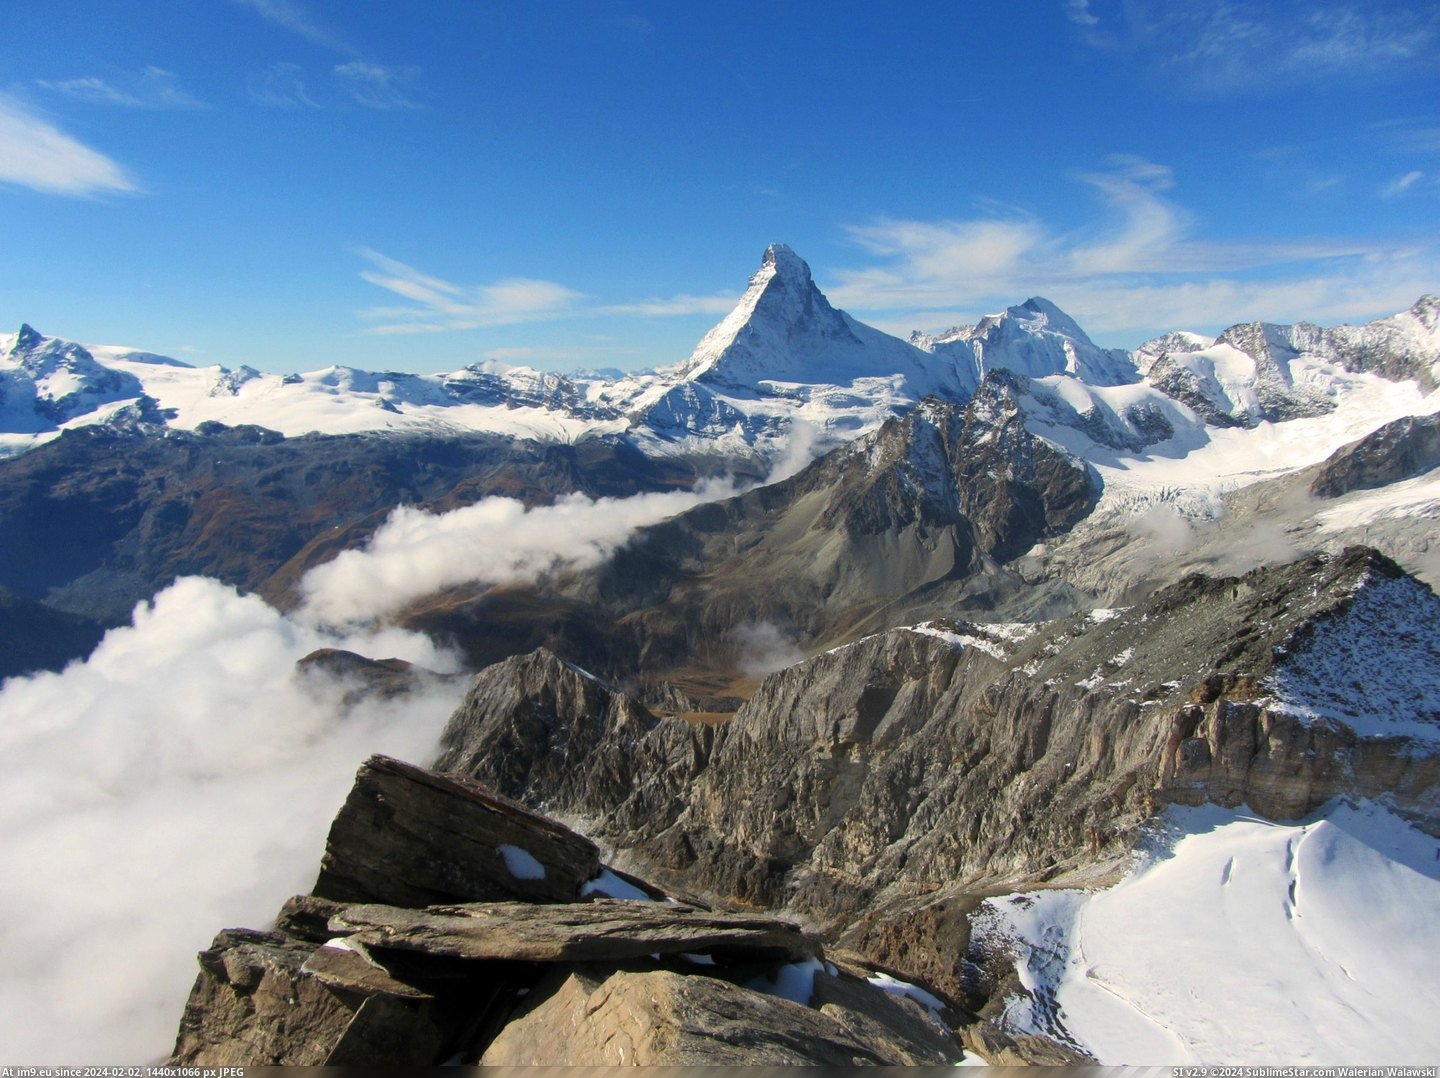 #Famous #Alps #Matterhorn #Peak [Earthporn] Looking over to the Matterhorn, most famous peak of the alps [2783x2074][OC] Pic. (Image of album My r/EARTHPORN favs))